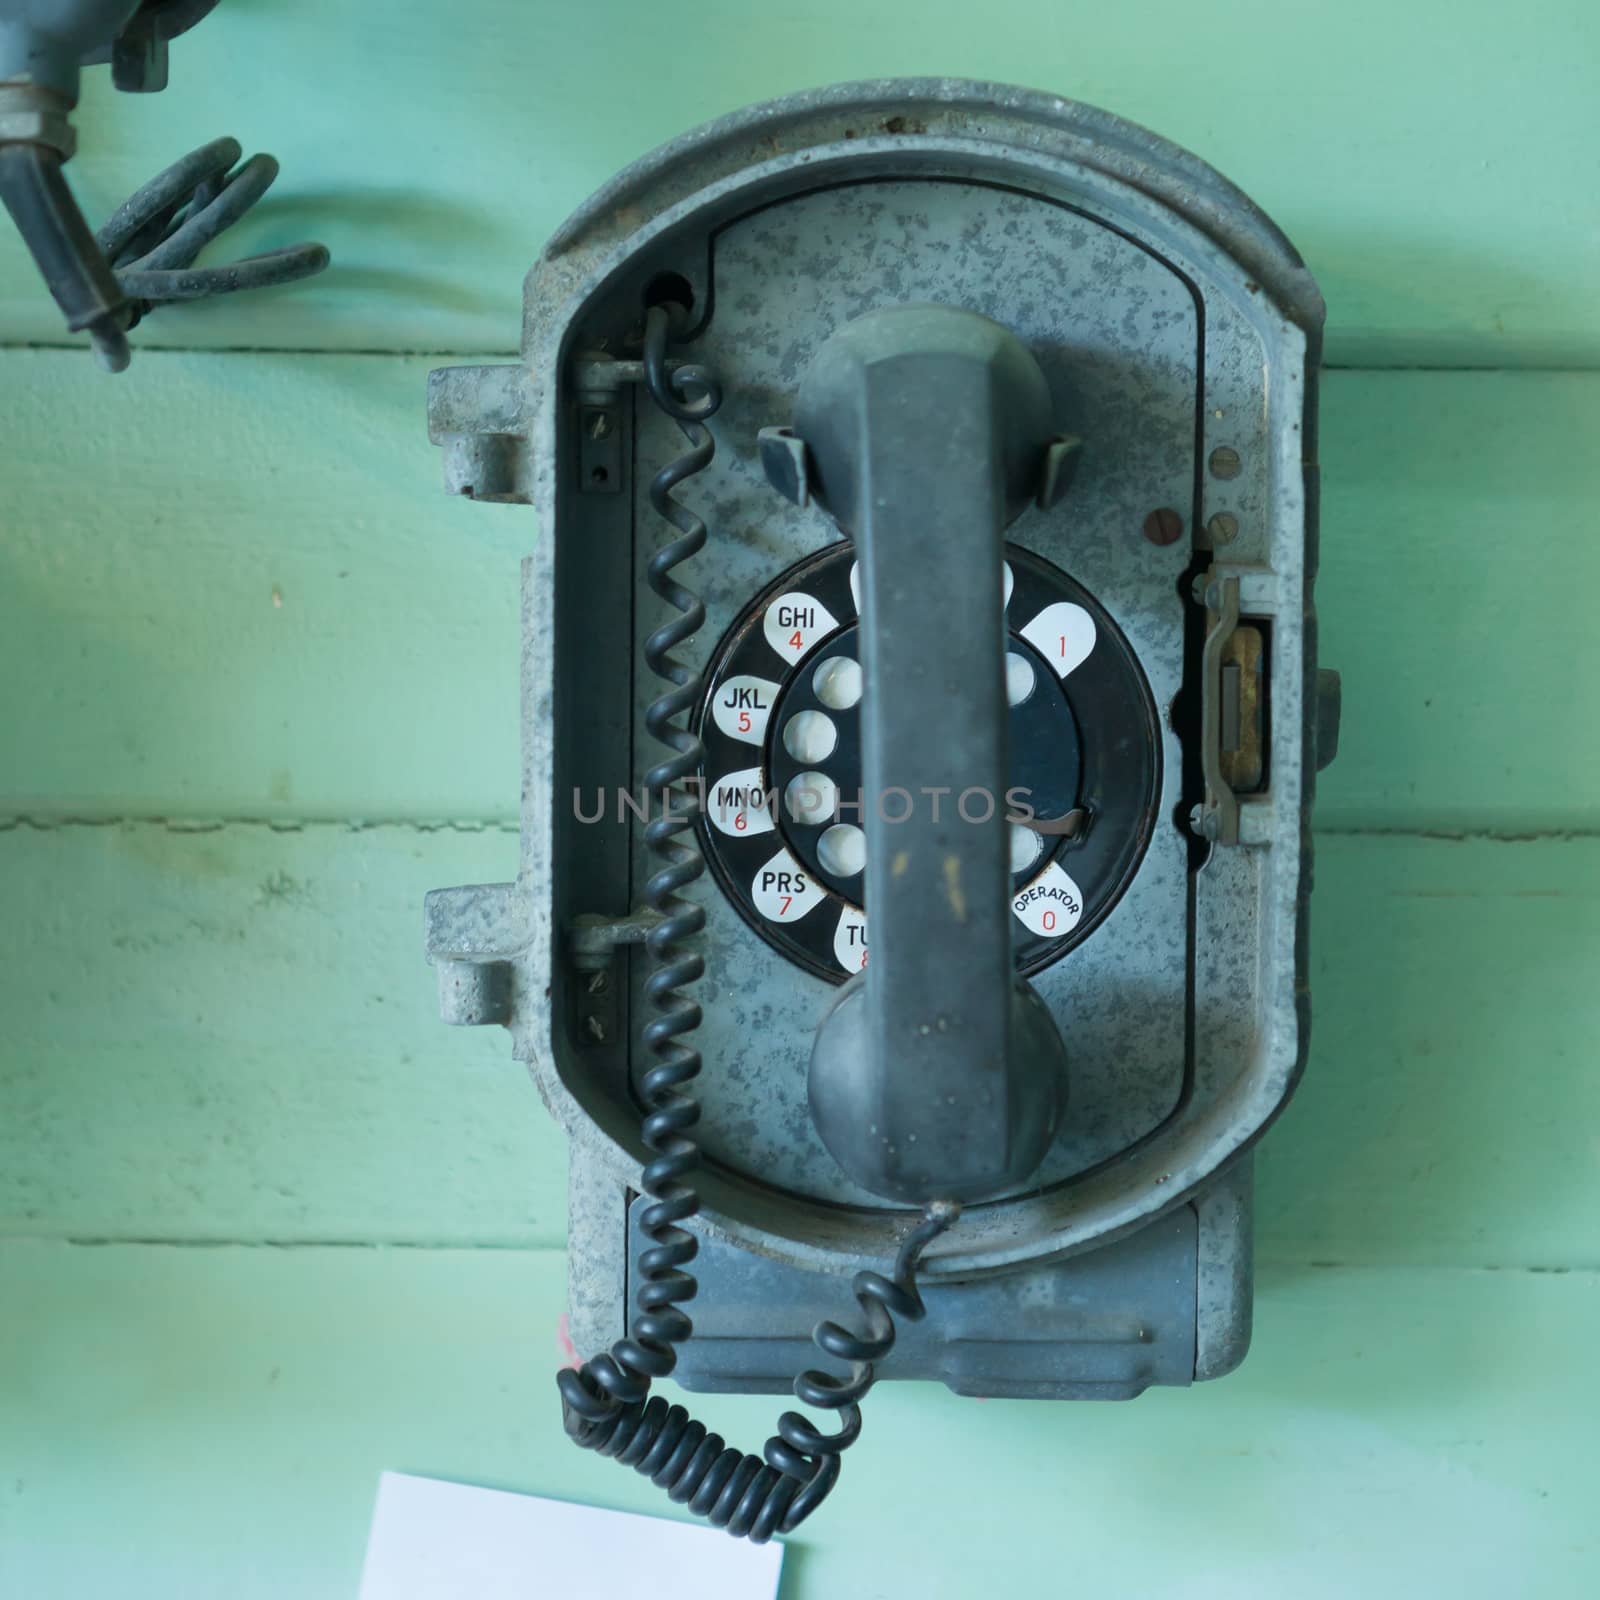 vintage telephone on the wall by witthaya